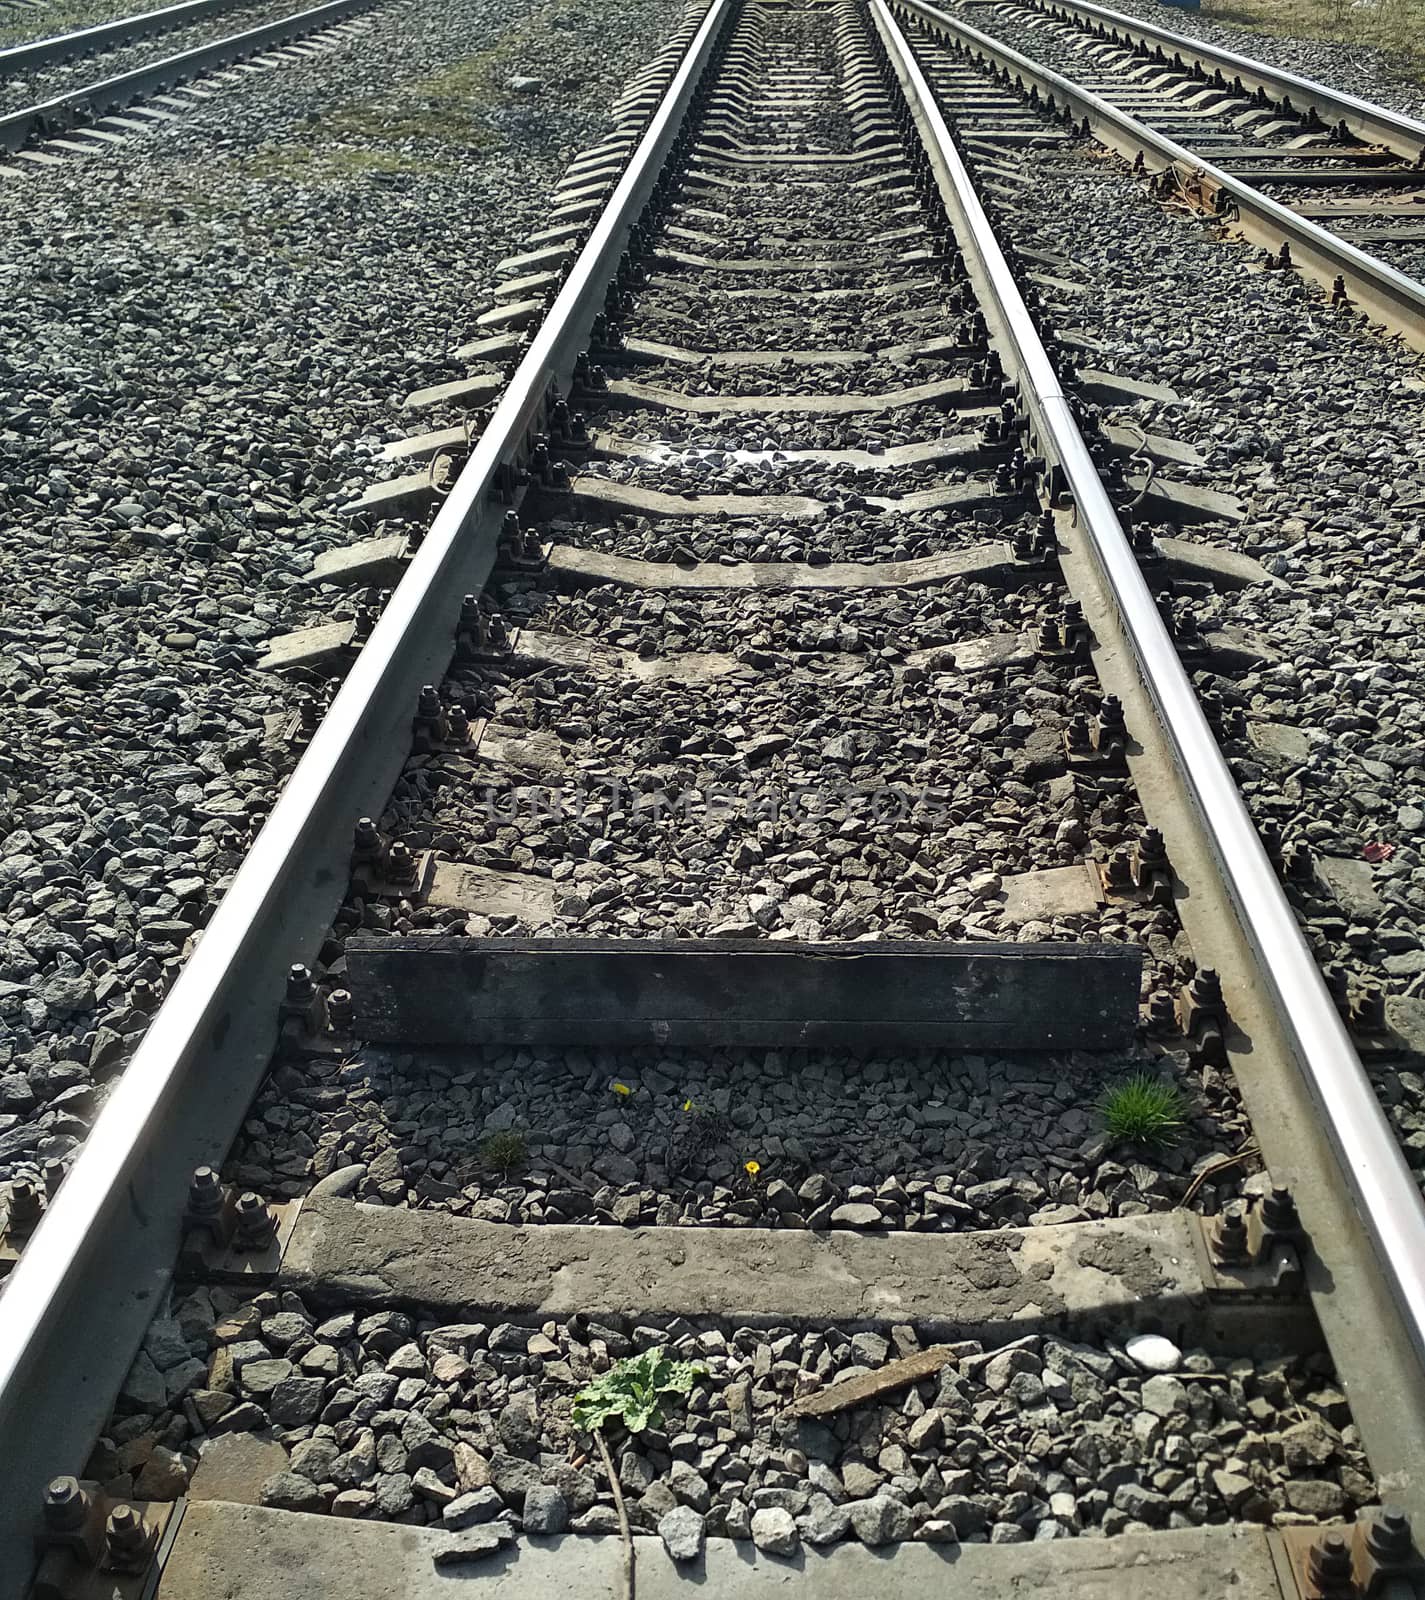 The rails on the sleepers stretching to the horizon on a granite rubble.